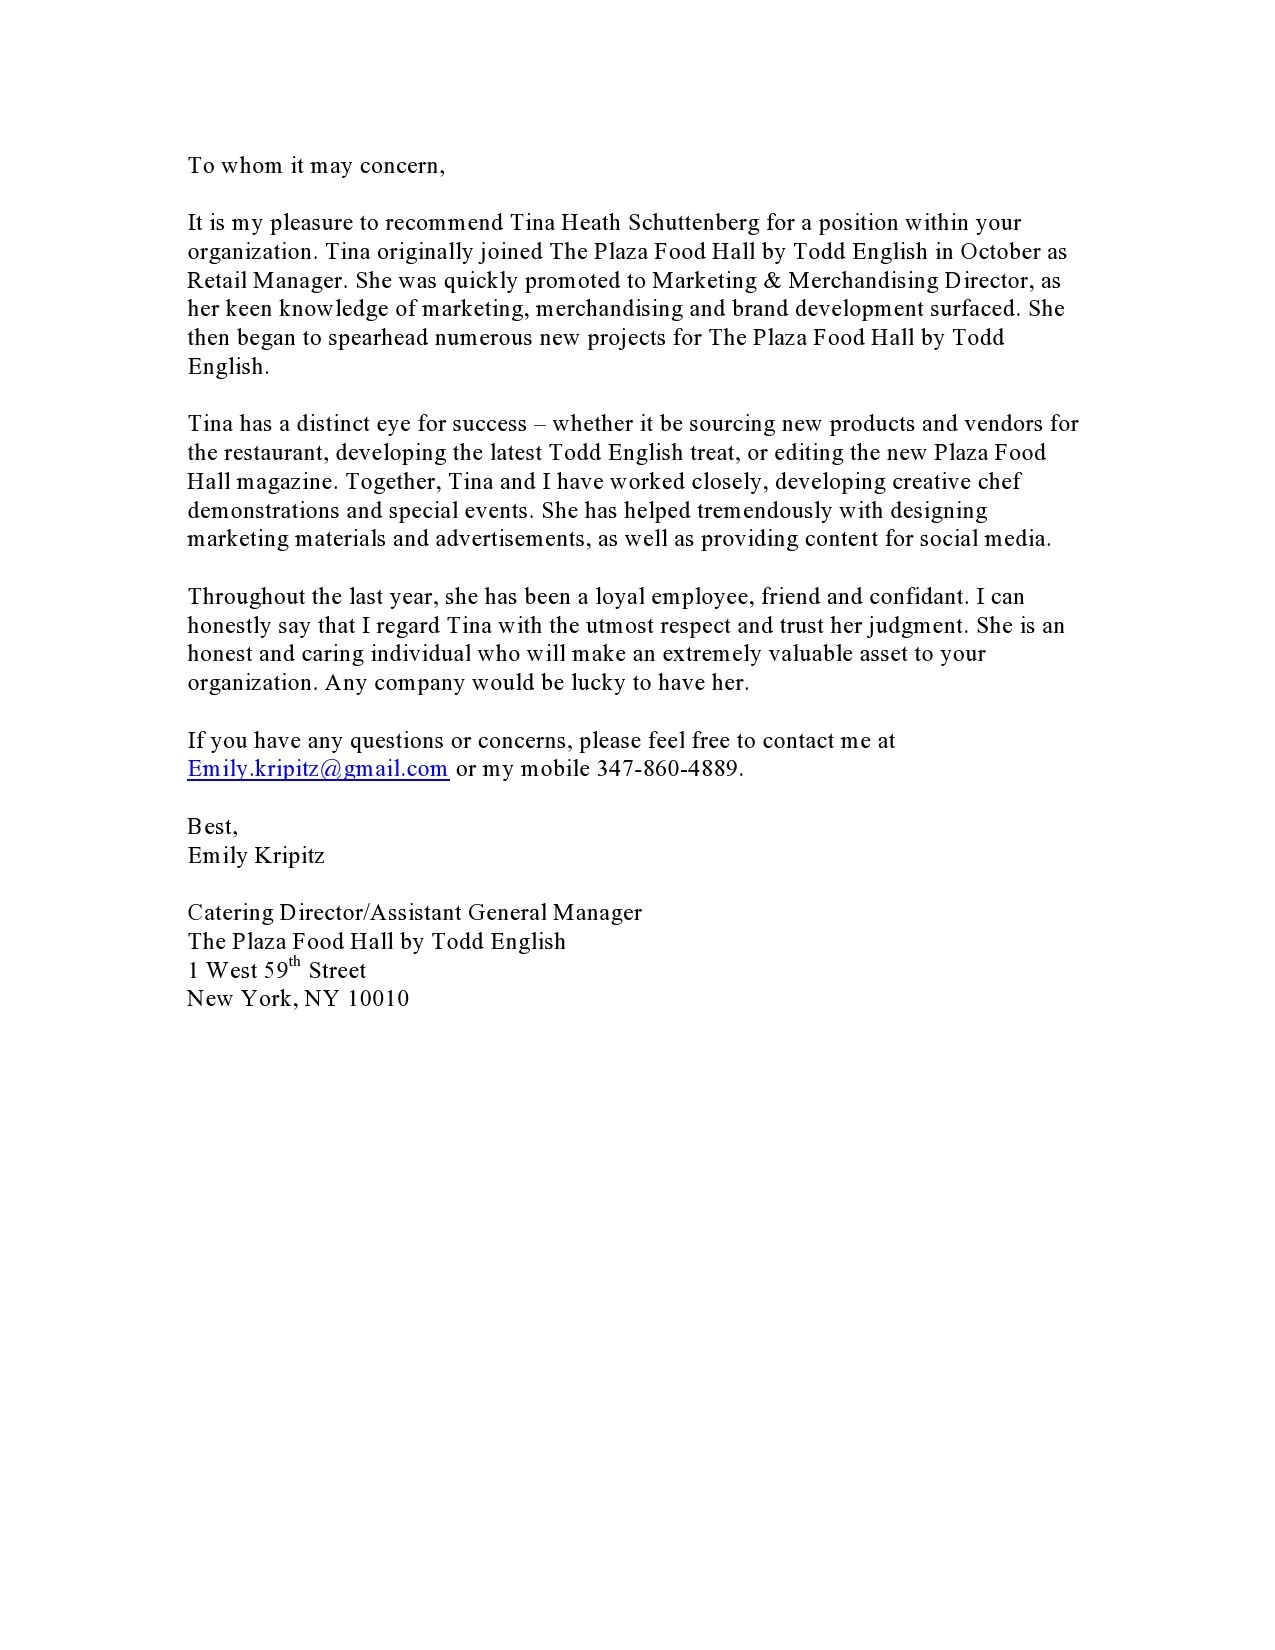 Reference Letter From Emily Former Catering Director At Todd with regard to sizing 1275 X 1650